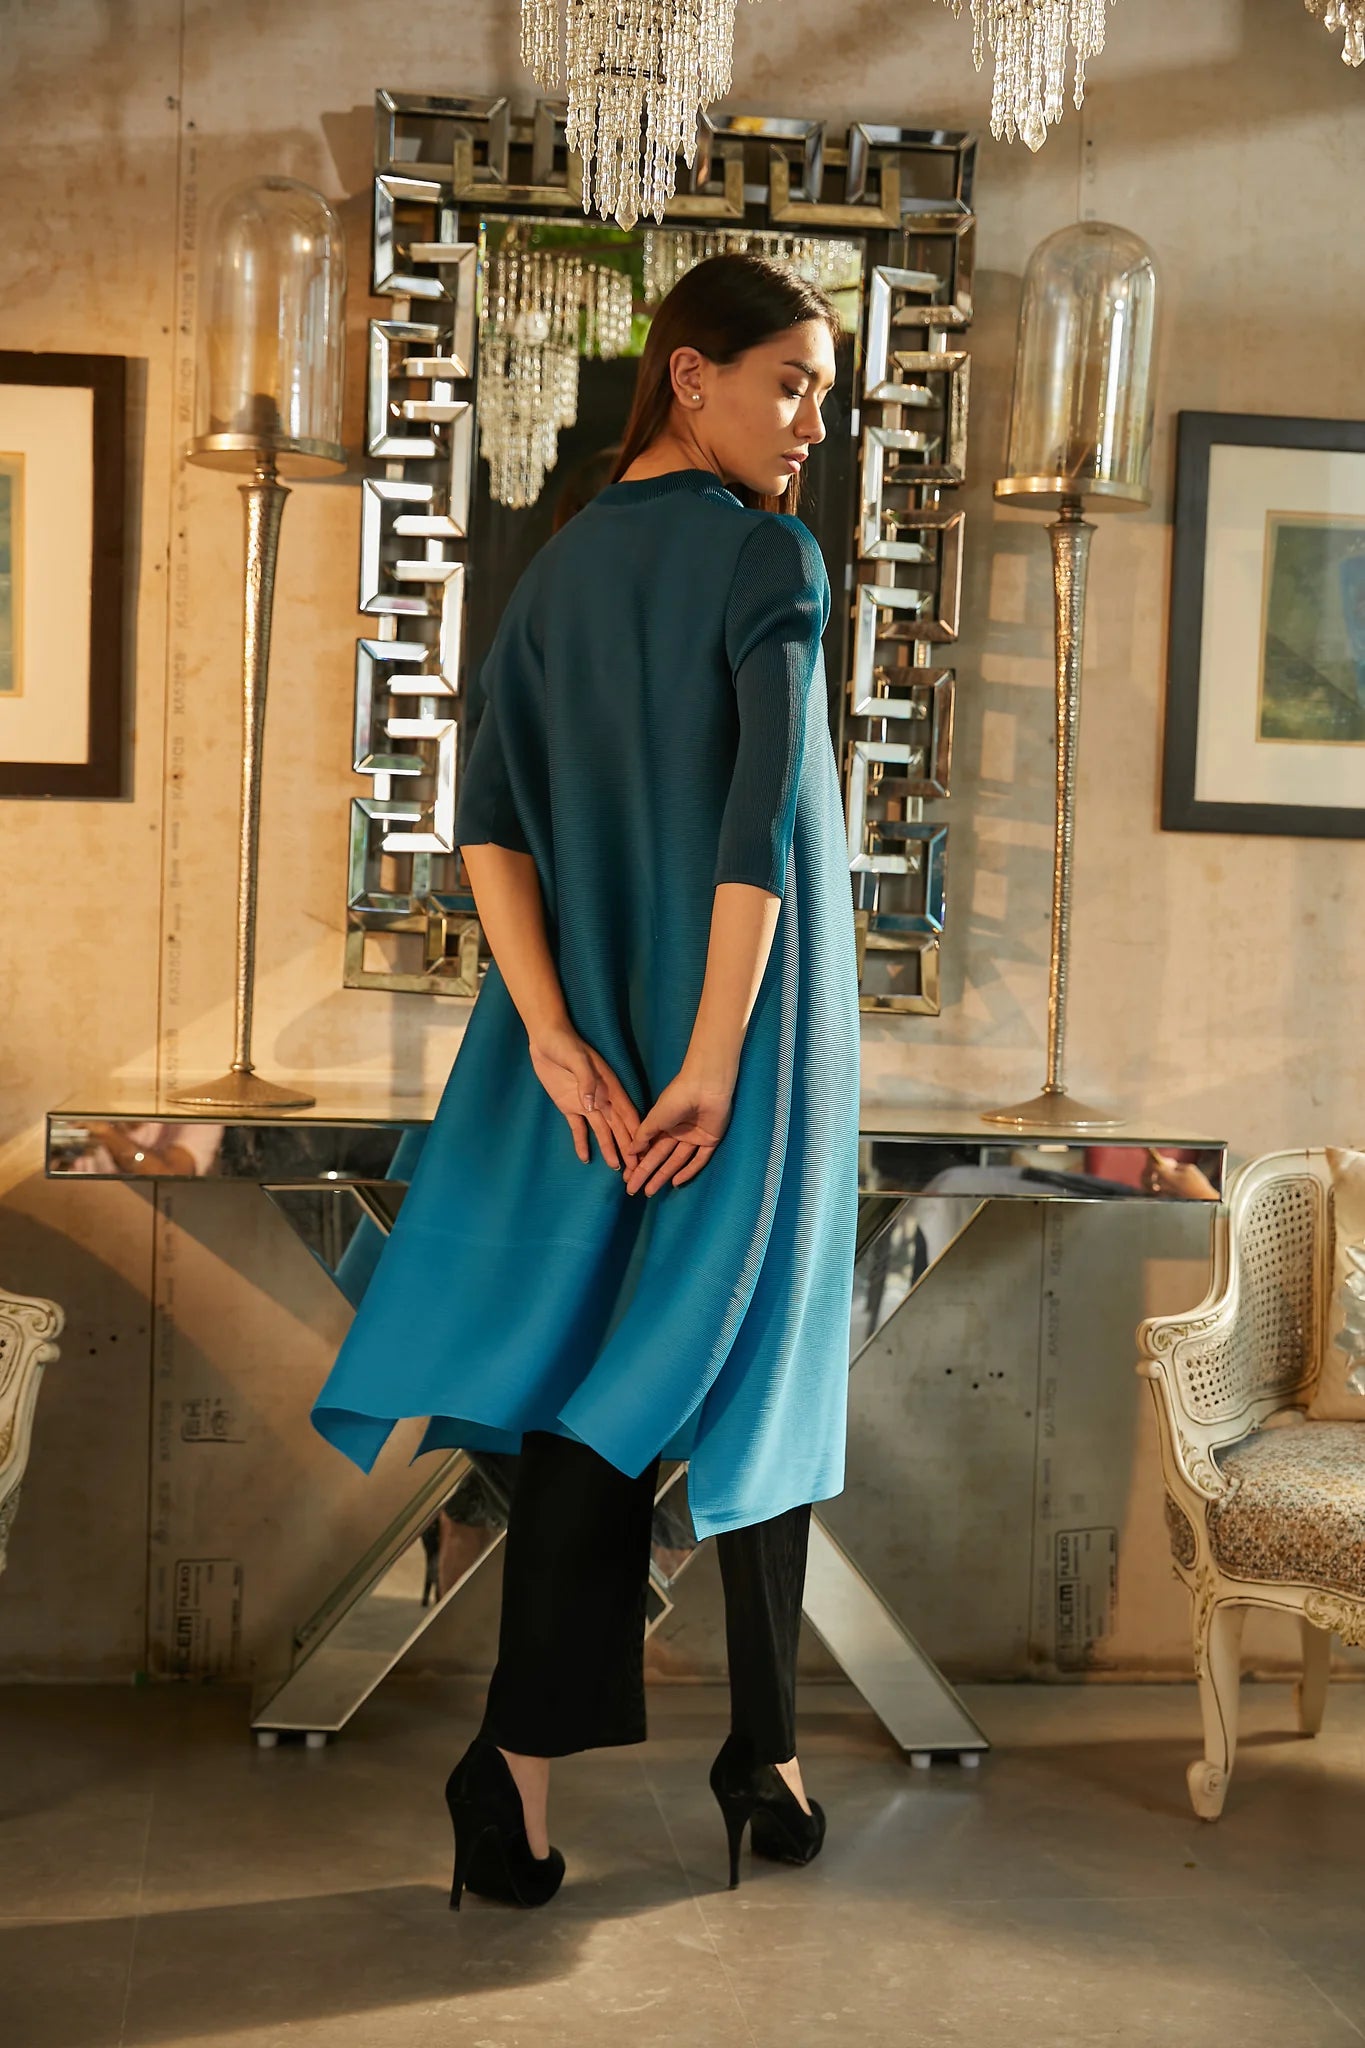 Image of This OMBRE TACY TASSEL TUNIC SET is the perfect blend of fashion and comfort! Crafted of lovely teal fabric, this two-piece set is sure to make a statement. Transform your style with this flattering and fun outfit - perfect for a day out or lounging around in style! From savoirfashions.com